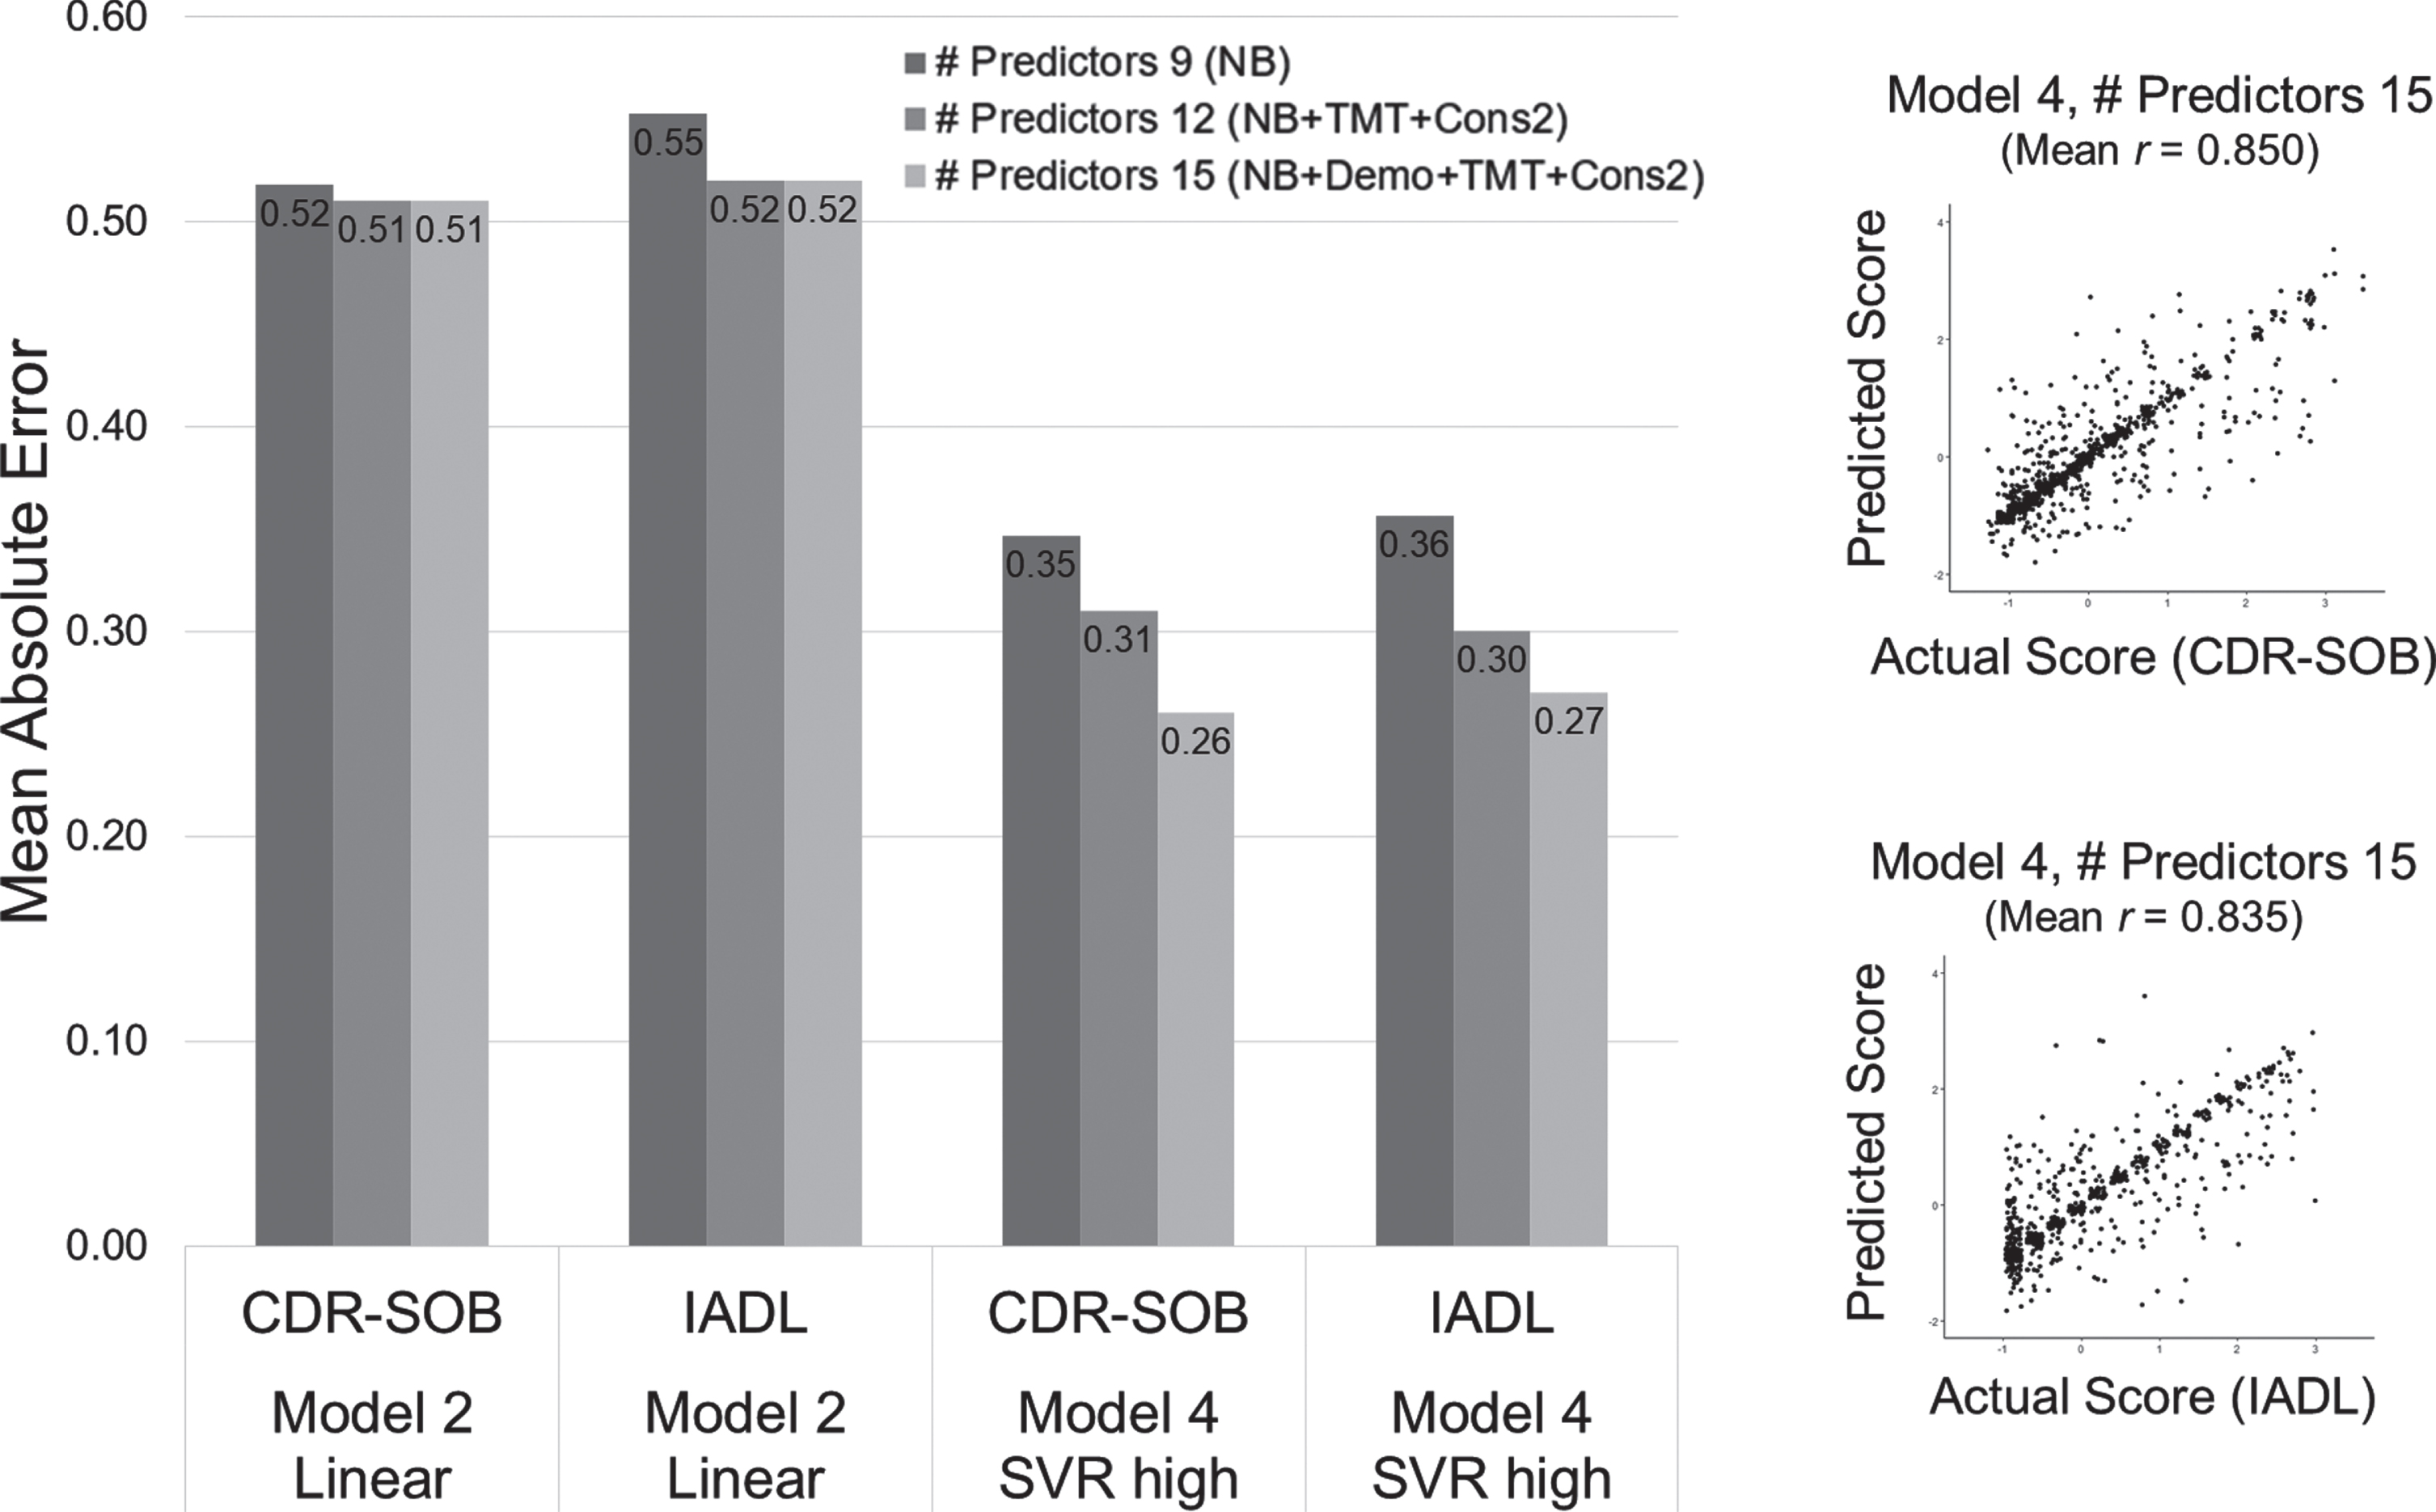 Enhanced predictive accuracy when predictors of test scores and demographics are added. The scatter plots represent a single iterated prediction result in Model 4 (SVR-high) with 14 predictors included. NB: Nine subtests of the neuropsychological battery used for CERAD-K total score summation, TMT: Trail Making Test A and B, Cons2: Construction Recall, Demo: Demographic information (age, education, sex).